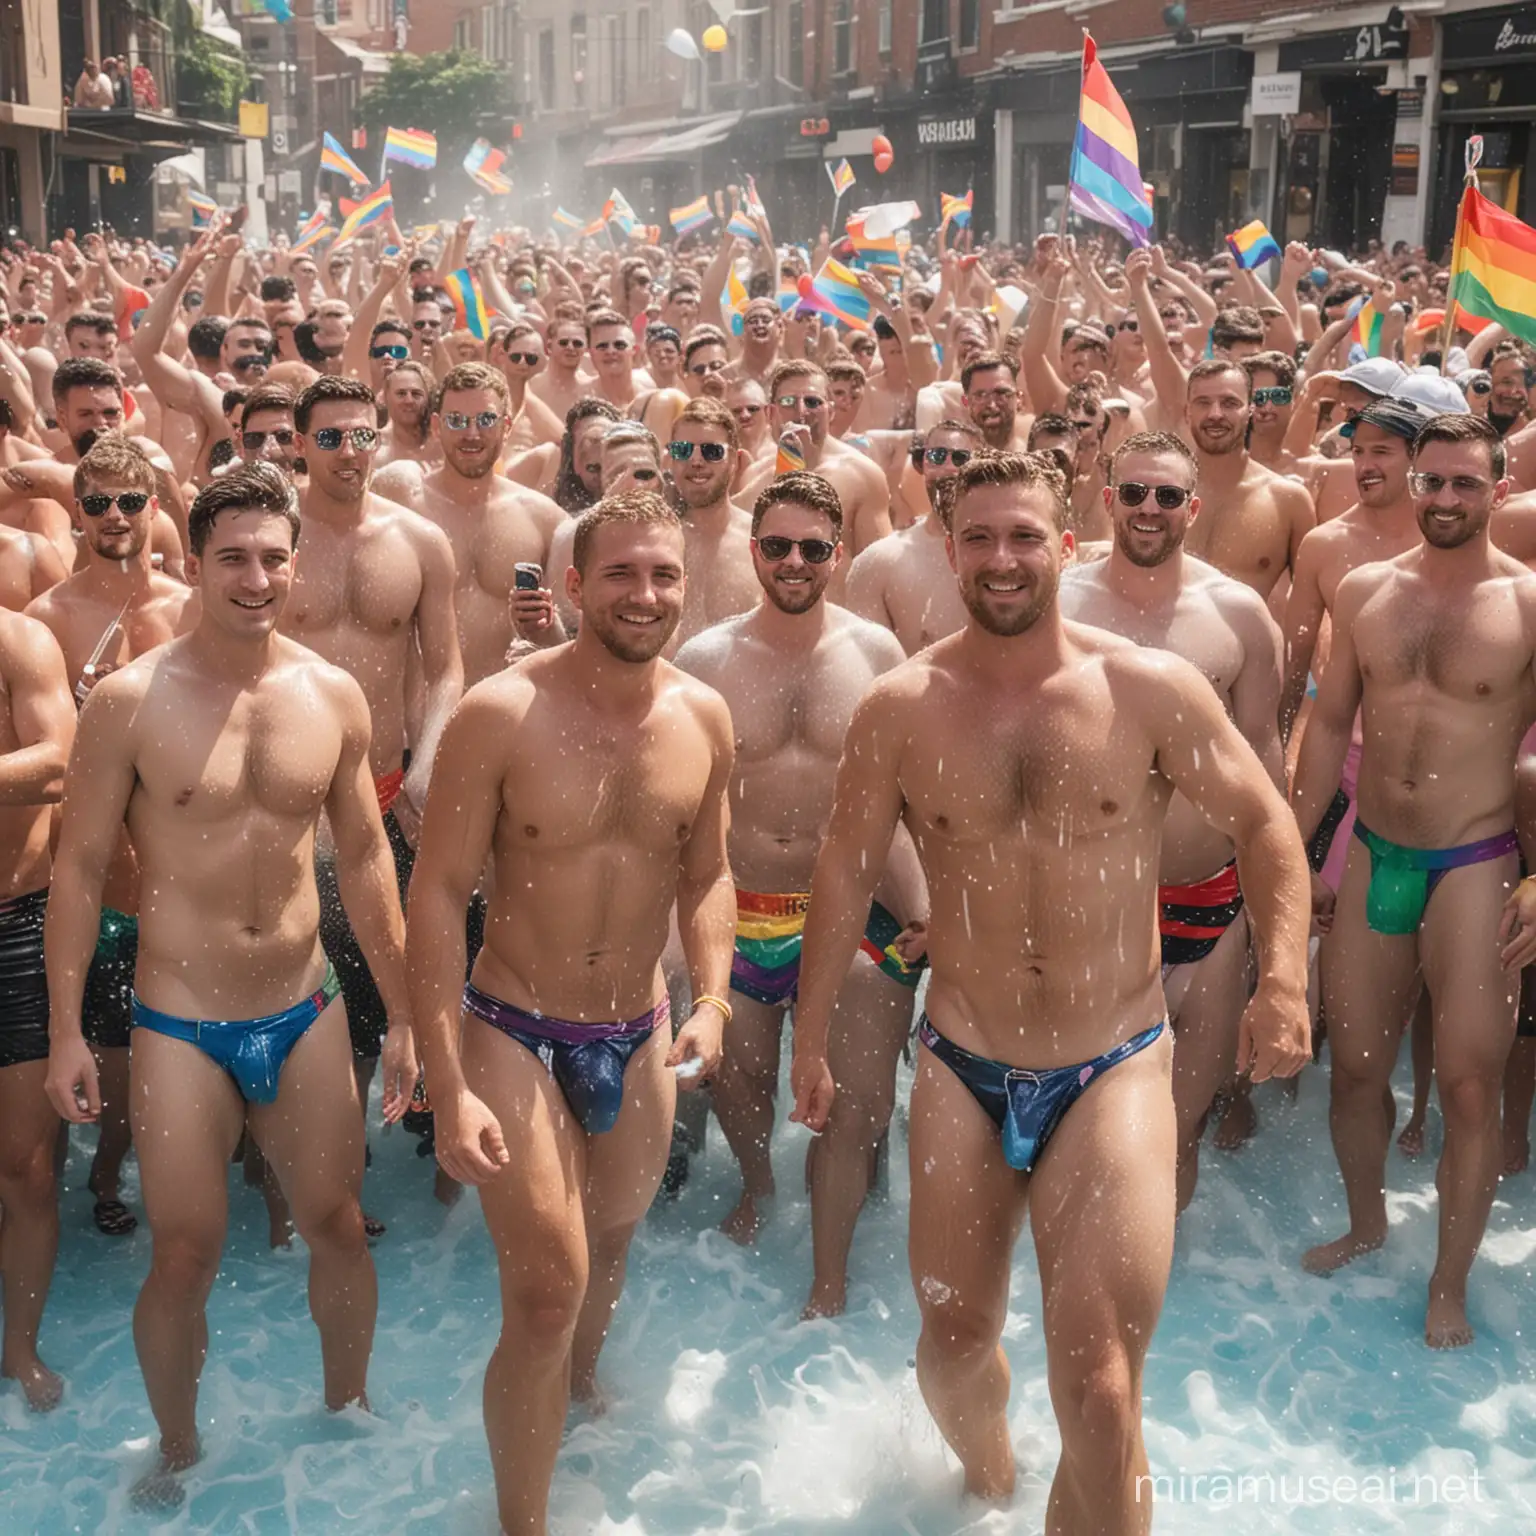 Vibrant Gay Pride Foam Party with Rainbow Flags and Diverse Crowd